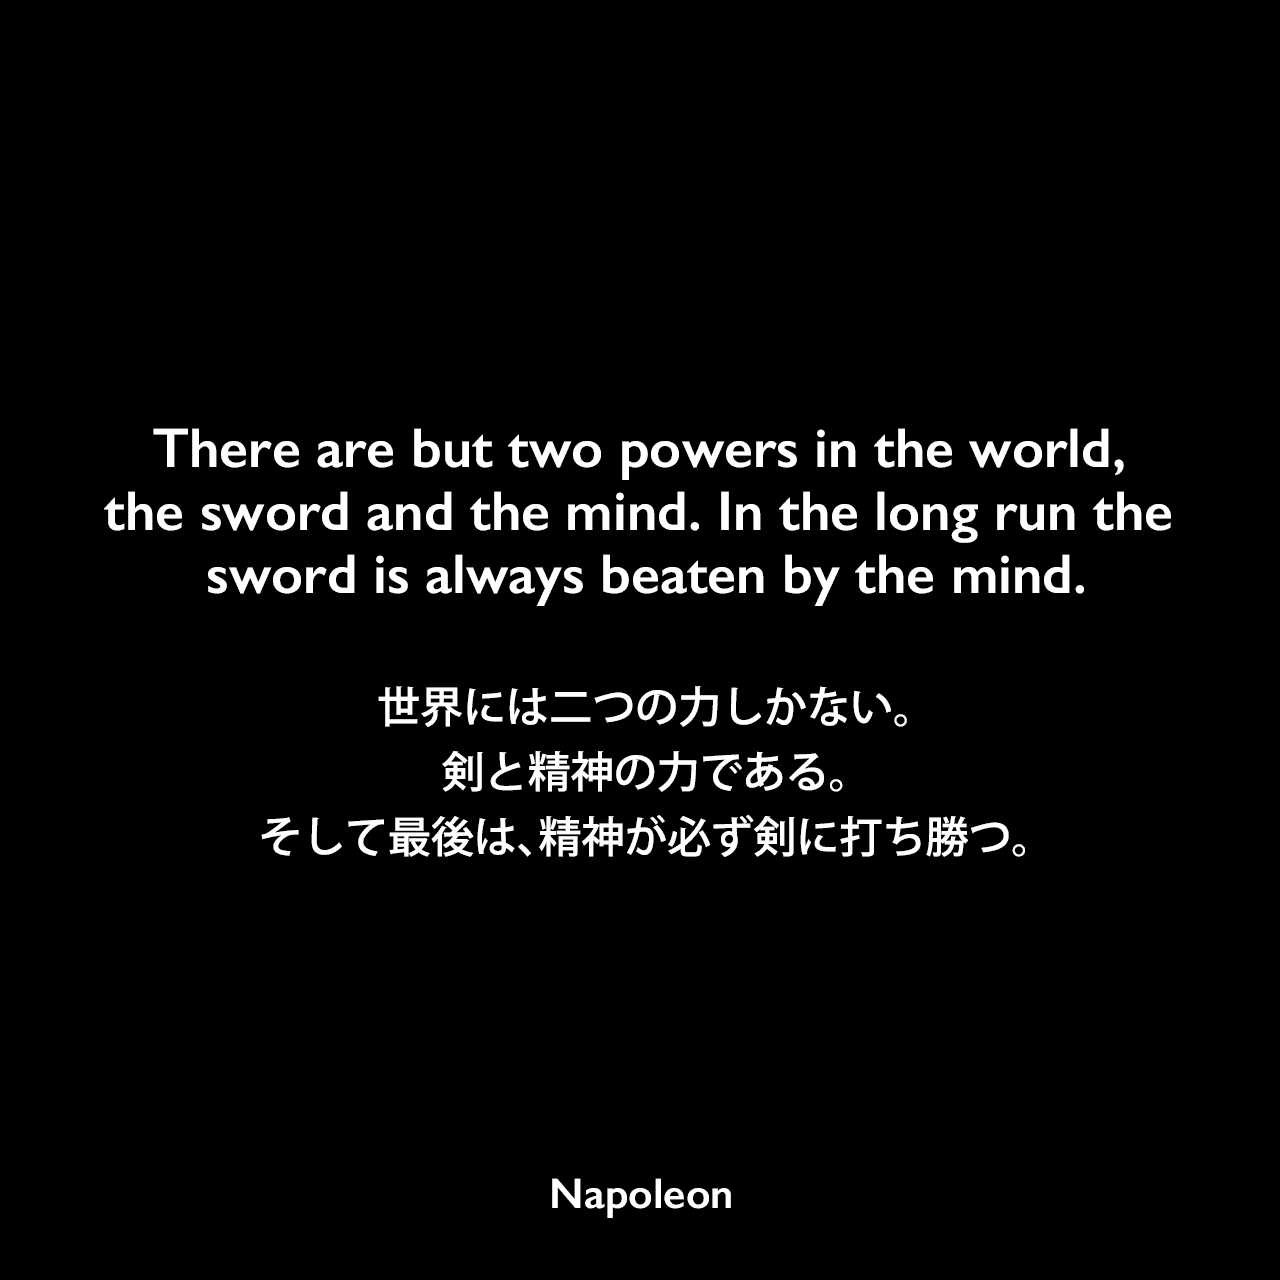 There are but two powers in the world, the sword and the mind. In the long run the sword is always beaten by the mind.世界には二つの力しかない。剣と精神の力である。そして最後は、精神が必ず剣に打ち勝つ。Napoleon